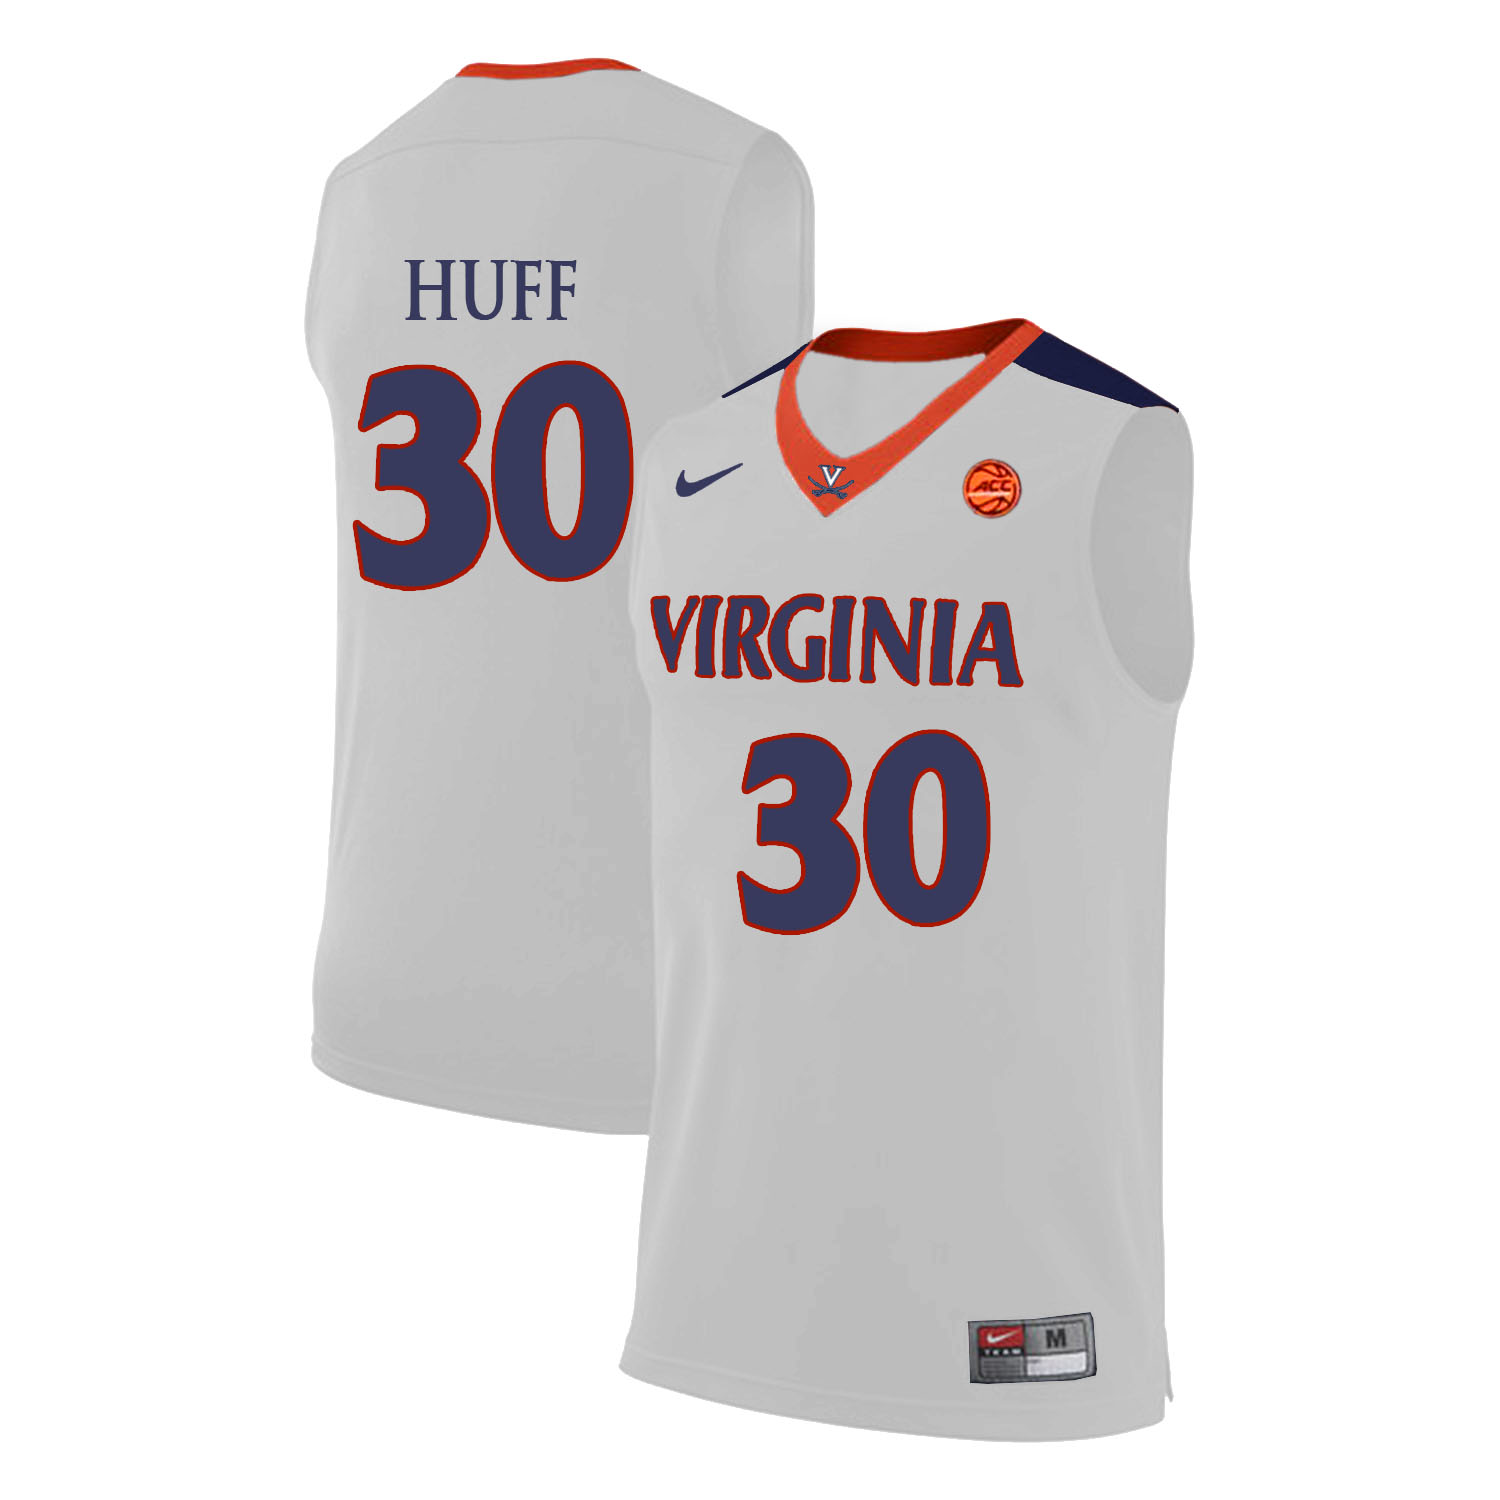 Virginia Cavaliers 30 Jay Huff White College Basketball Jersey